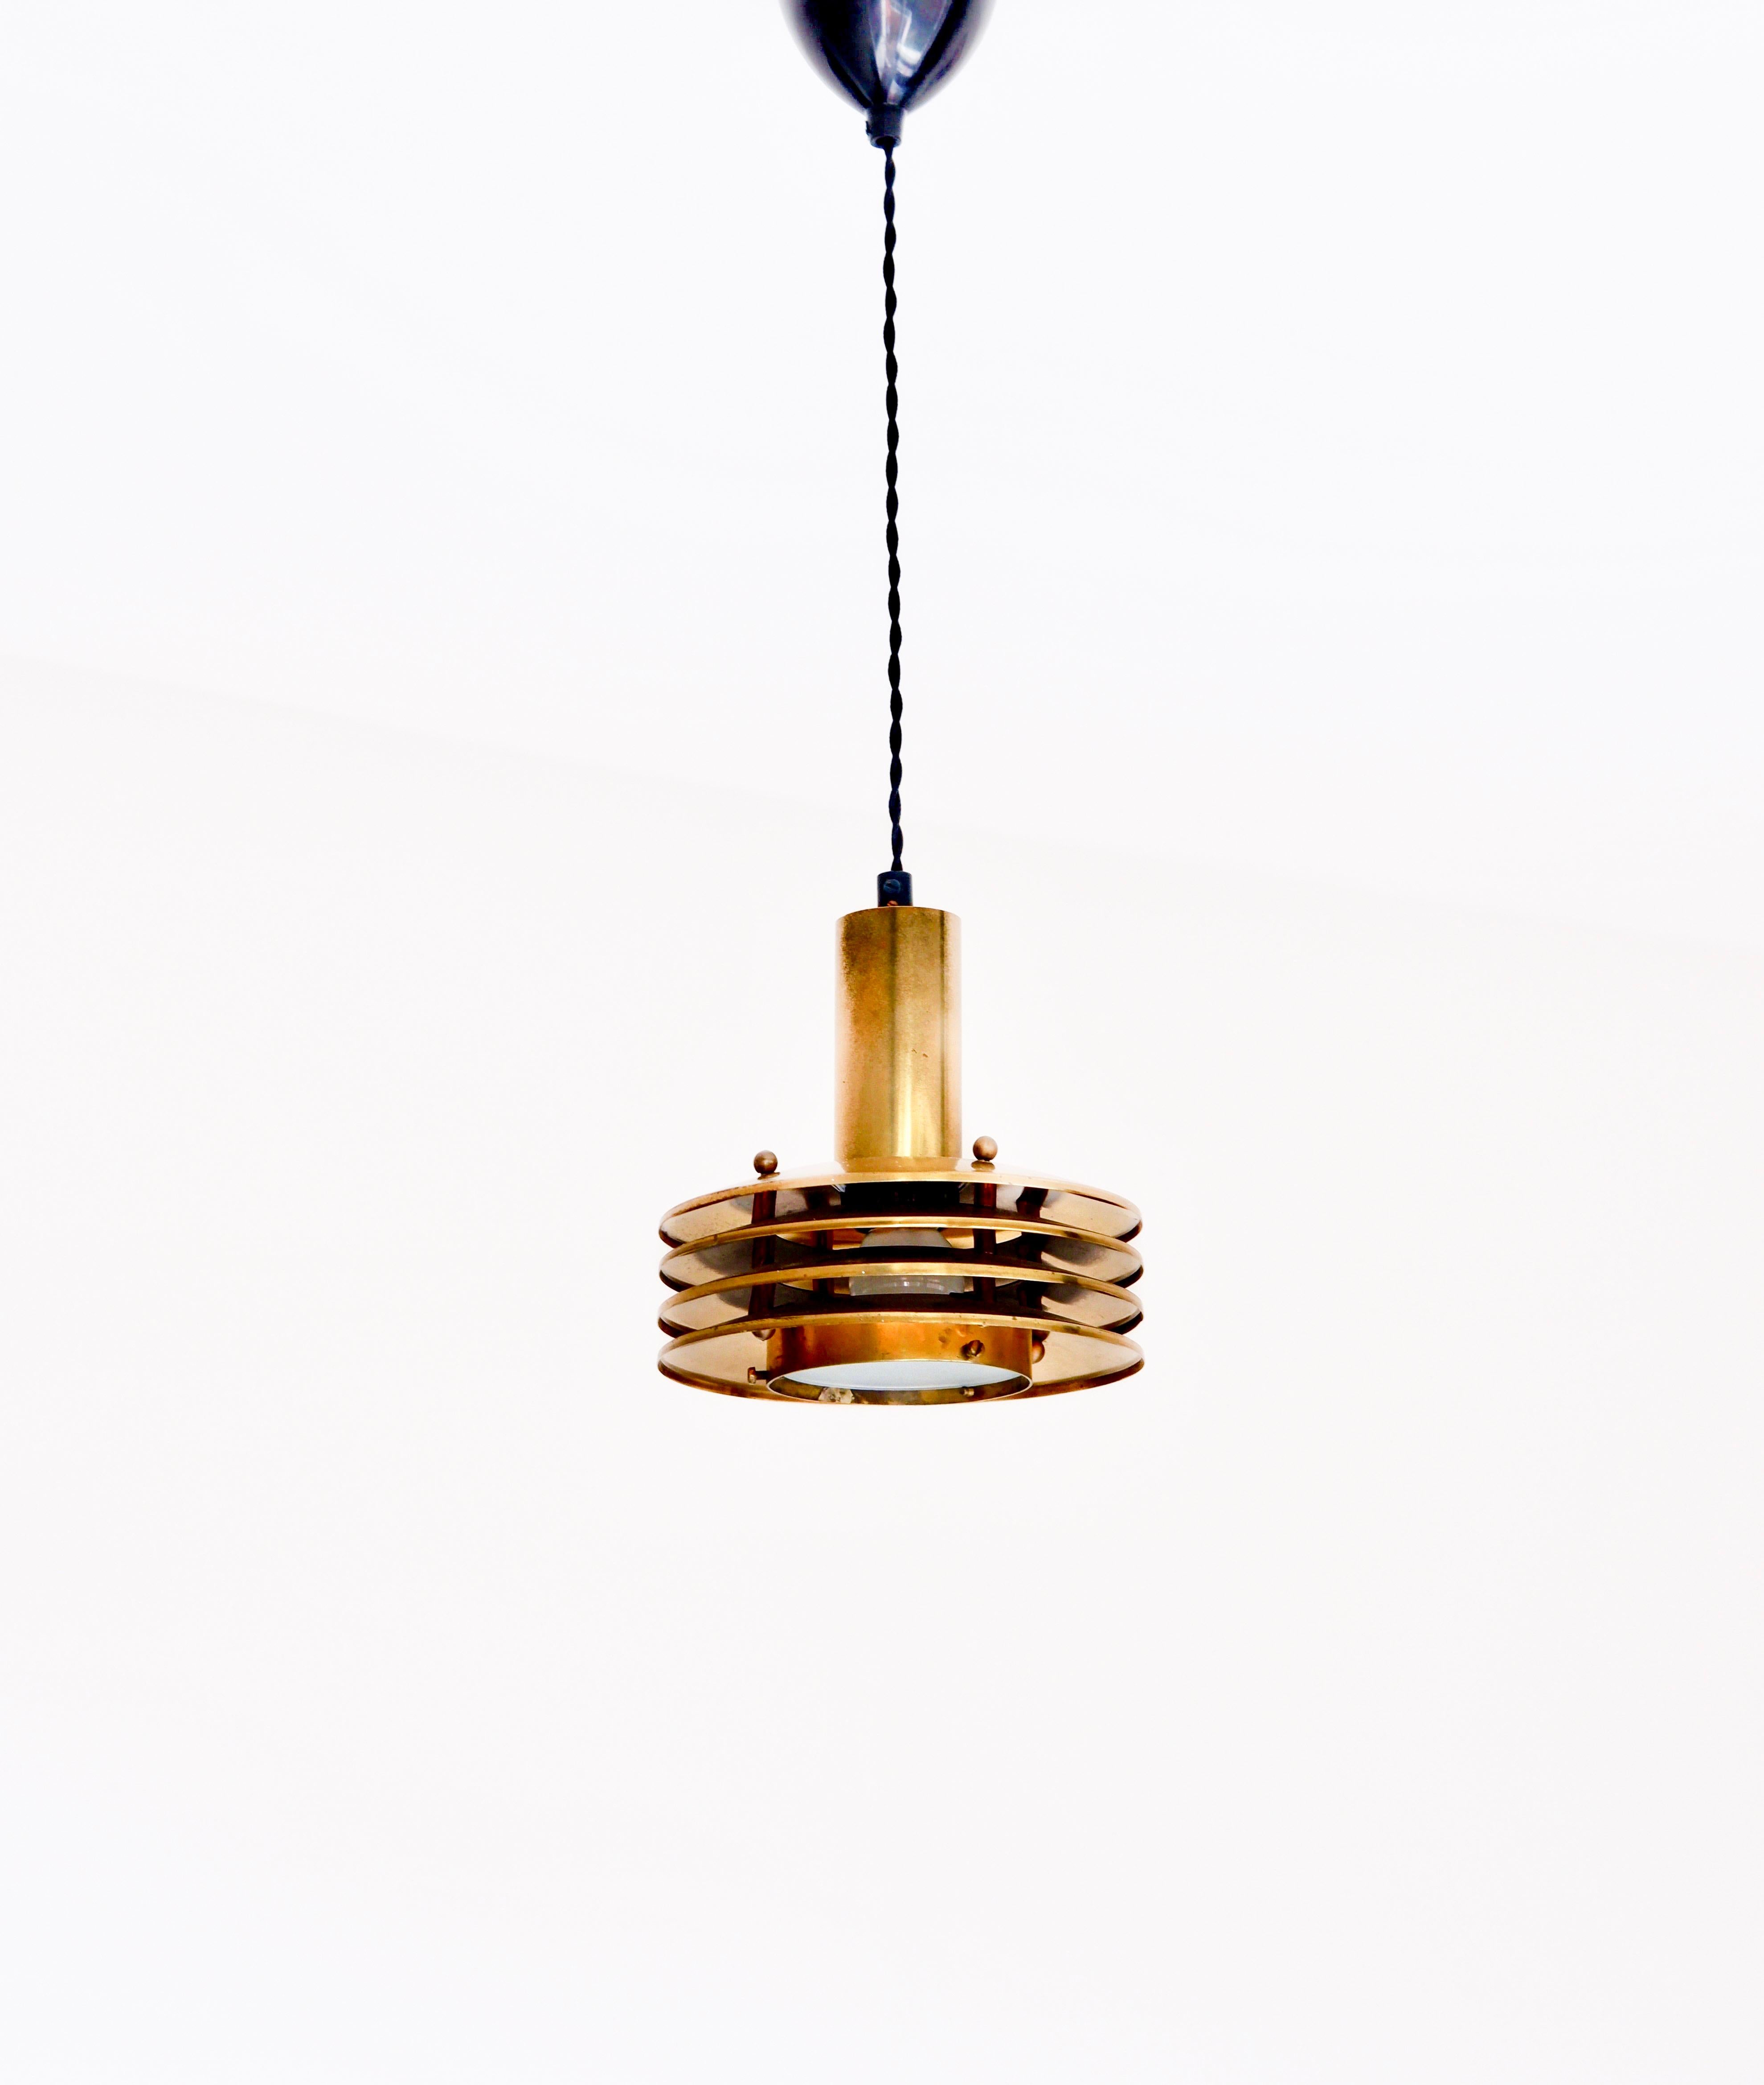 Rare pendant designed by Kai Ruokonen, made in solid brass with 4 rings and a glass diffuser. The overhall condition is good and the lamp has a good patina with trace of use and age. The lamp is composed by 4 lamp shade rings hold them together by